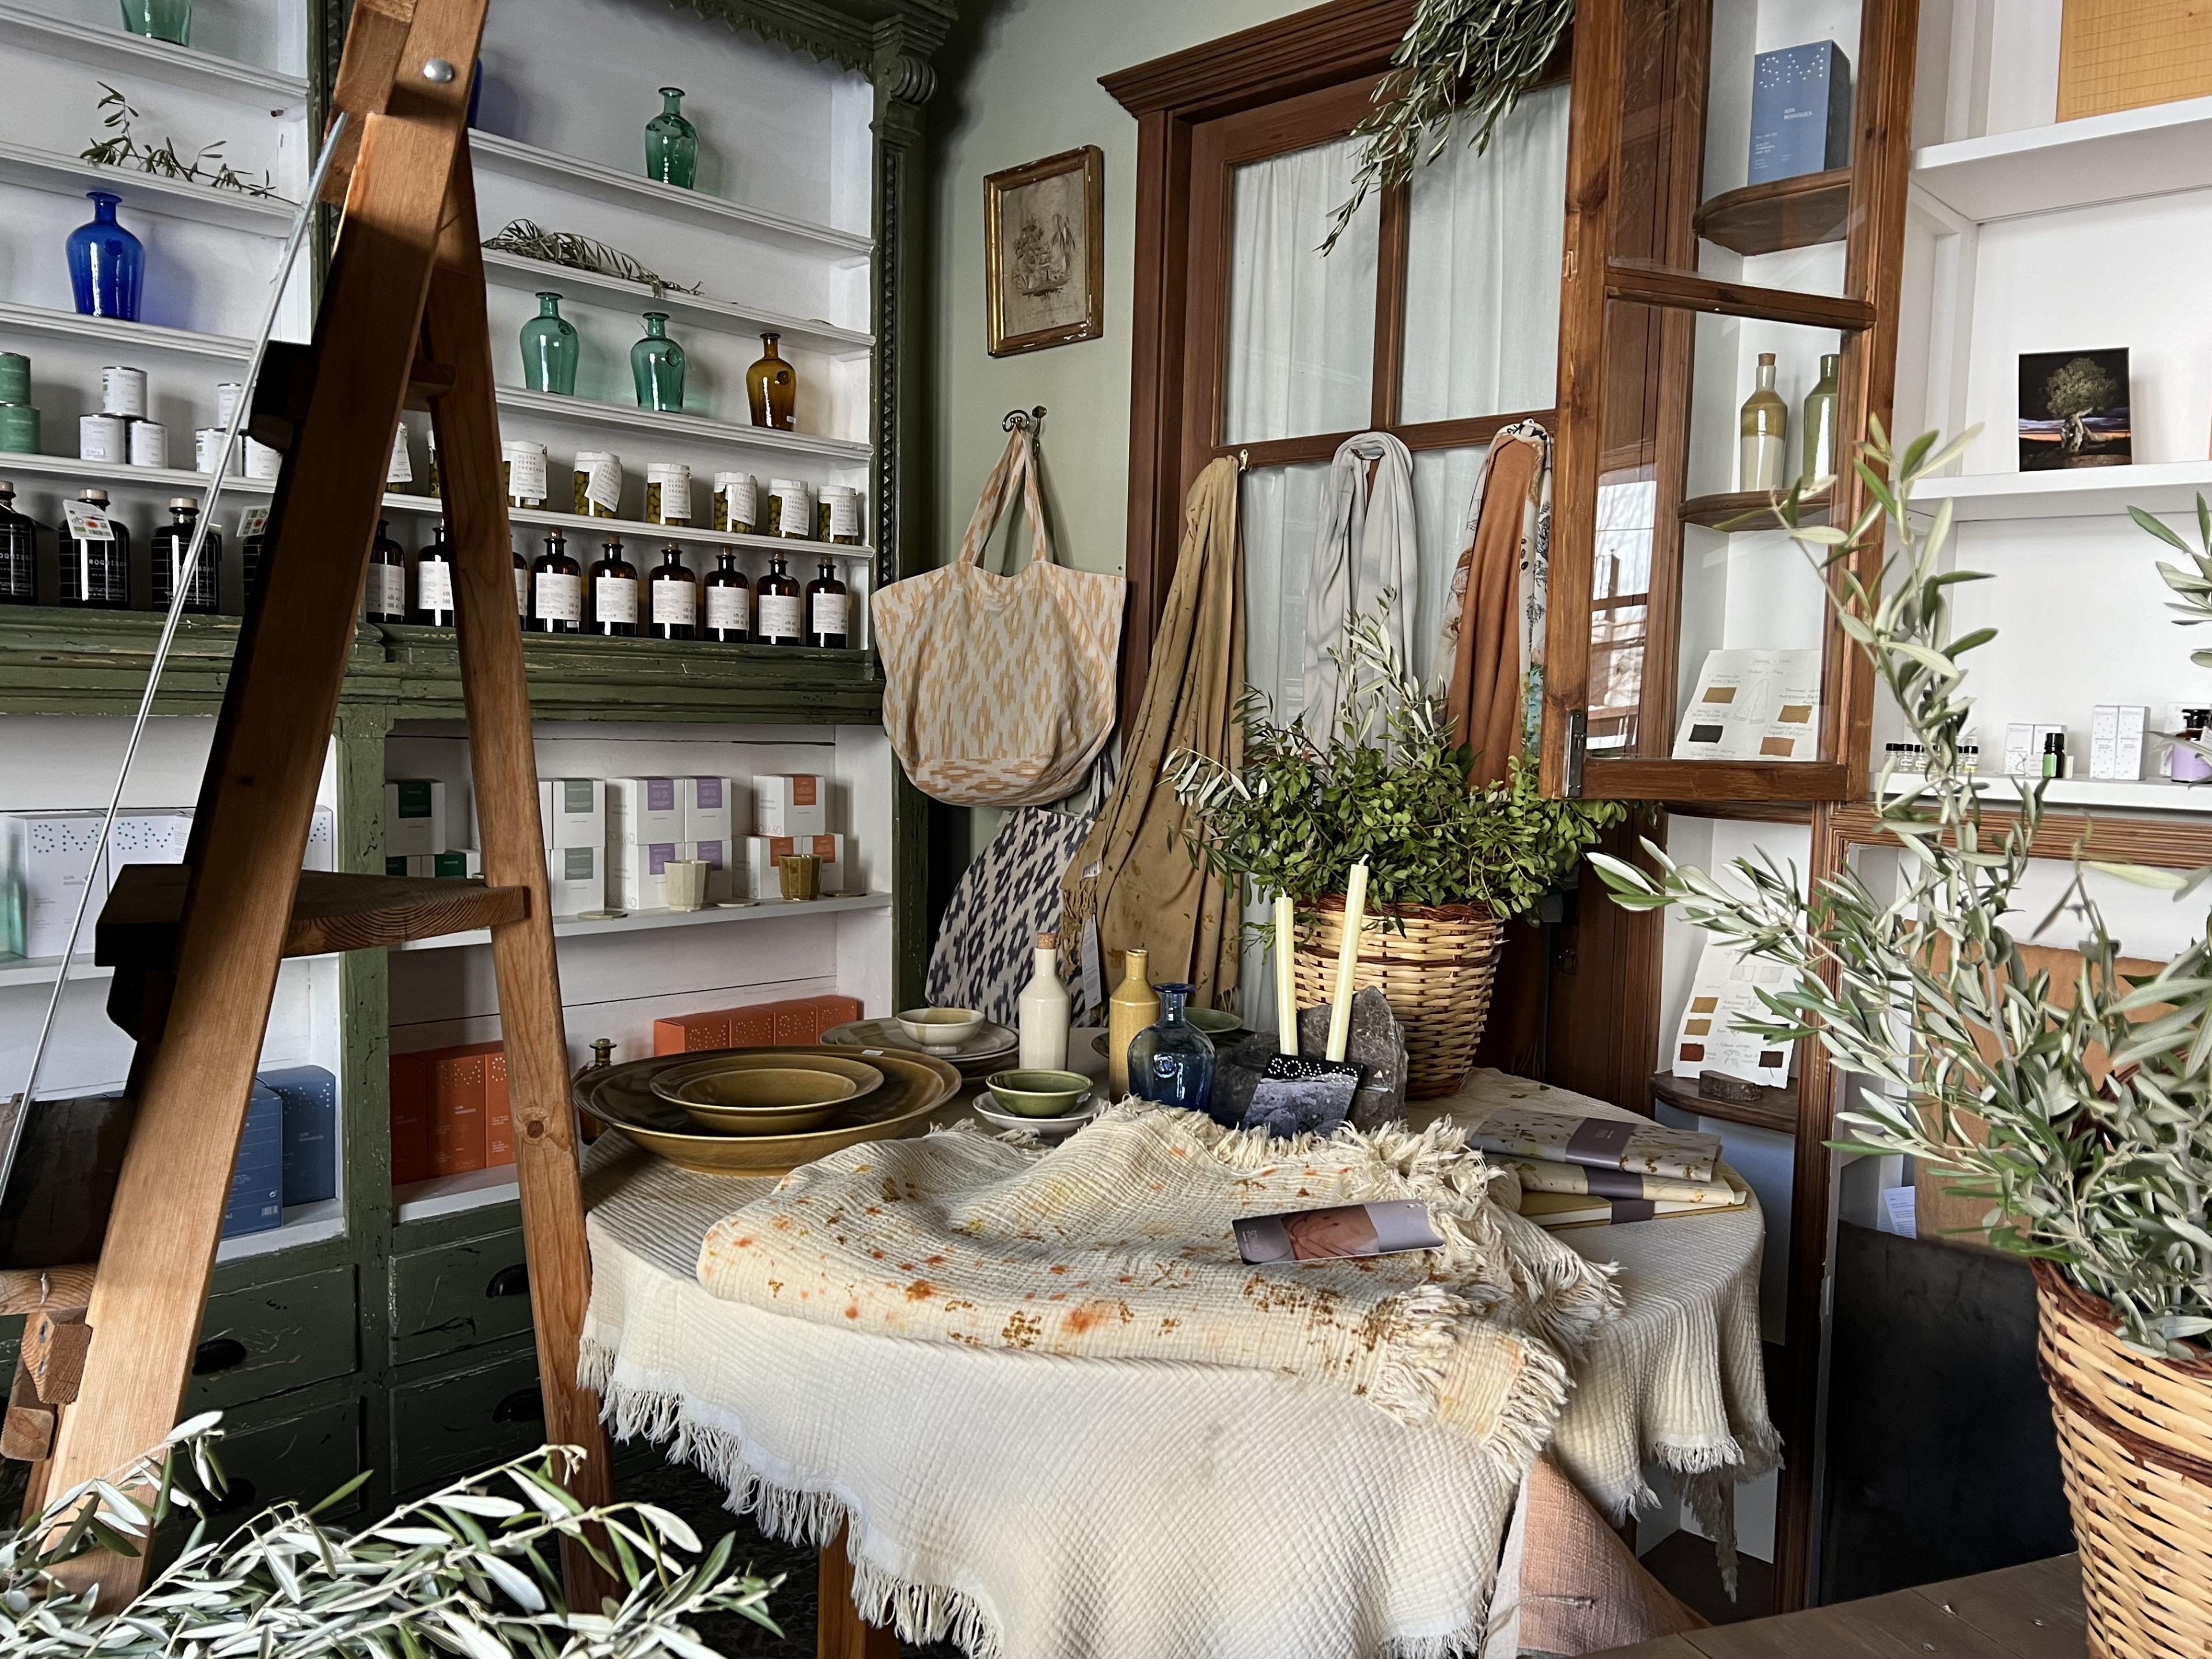 Corner look at the shop with bottles and vases on shelving, a table topped with decor and an easel next to the table 